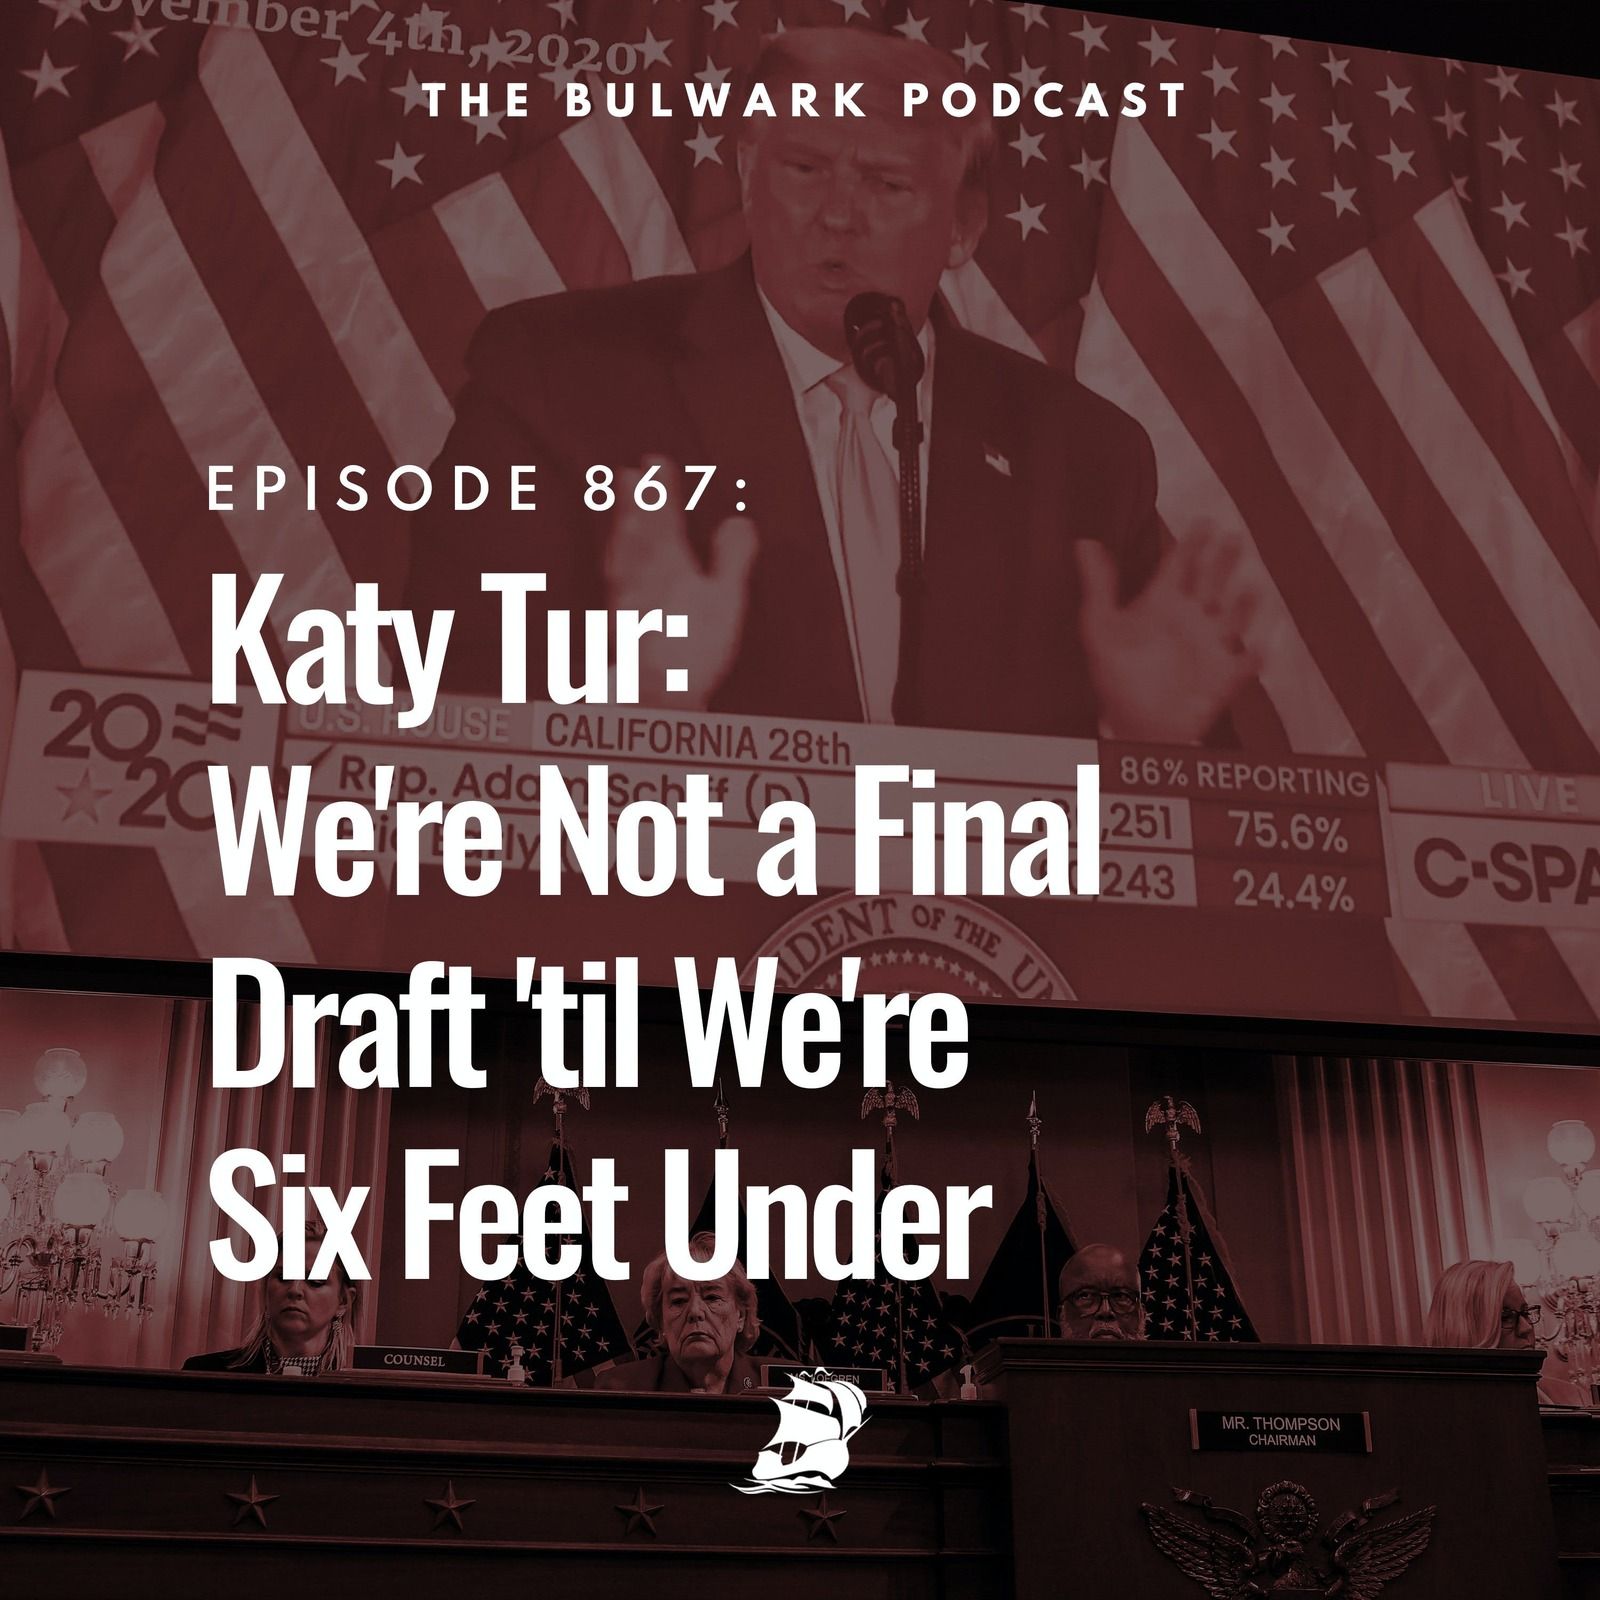 Katy Tur: We're Not a Final Draft 'til We're Six Feet Under by The Bulwark Podcast